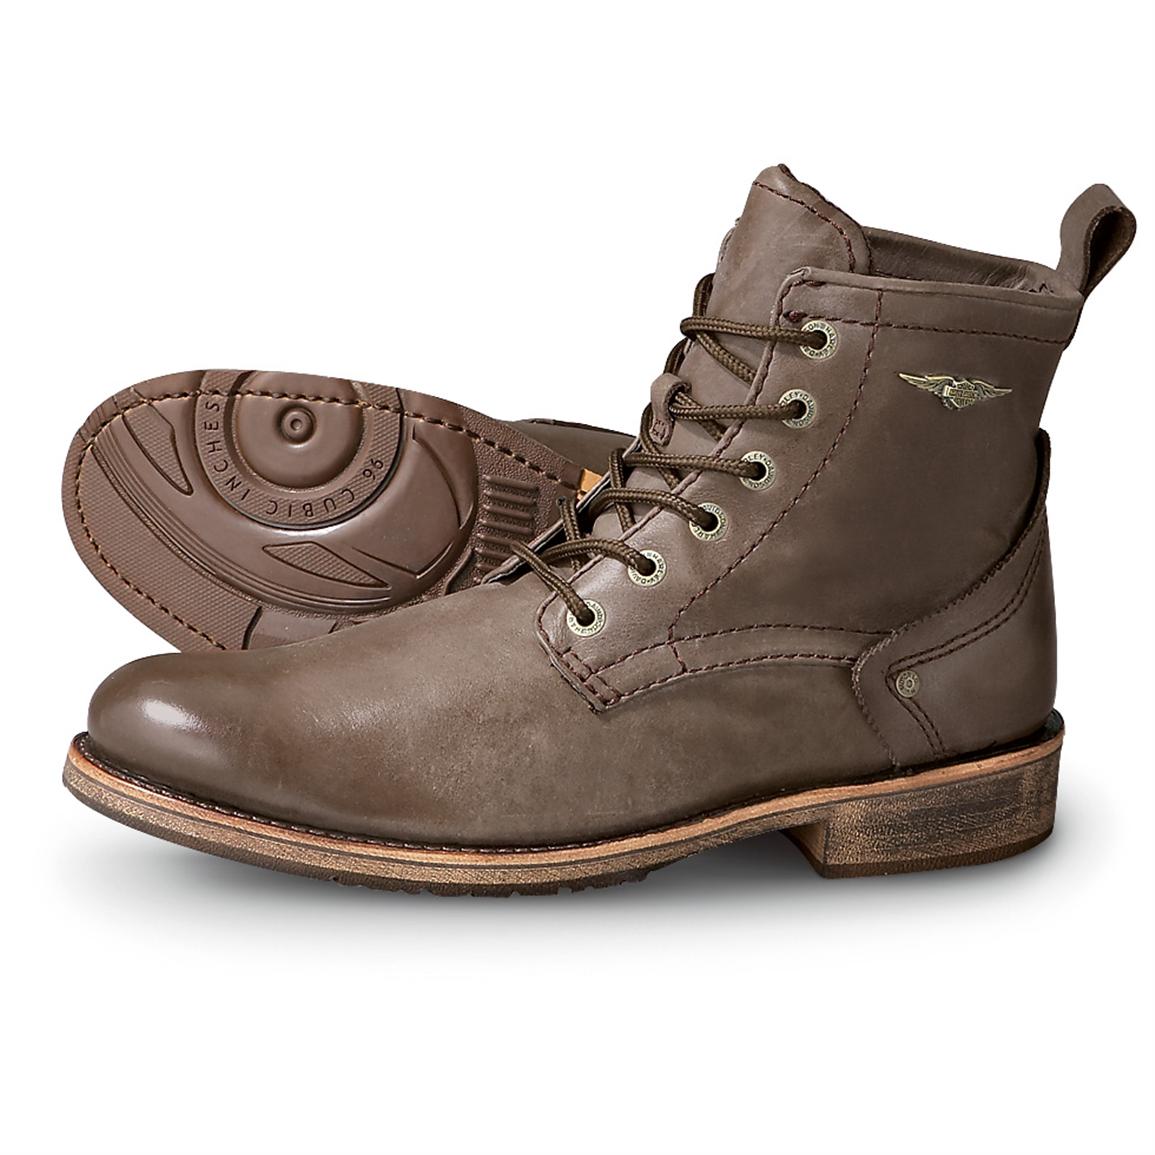 Men S Harley Davidson Yukon Lace Boots Brown 149942 Motorcycle Biker Boots At Sportsman S Guide